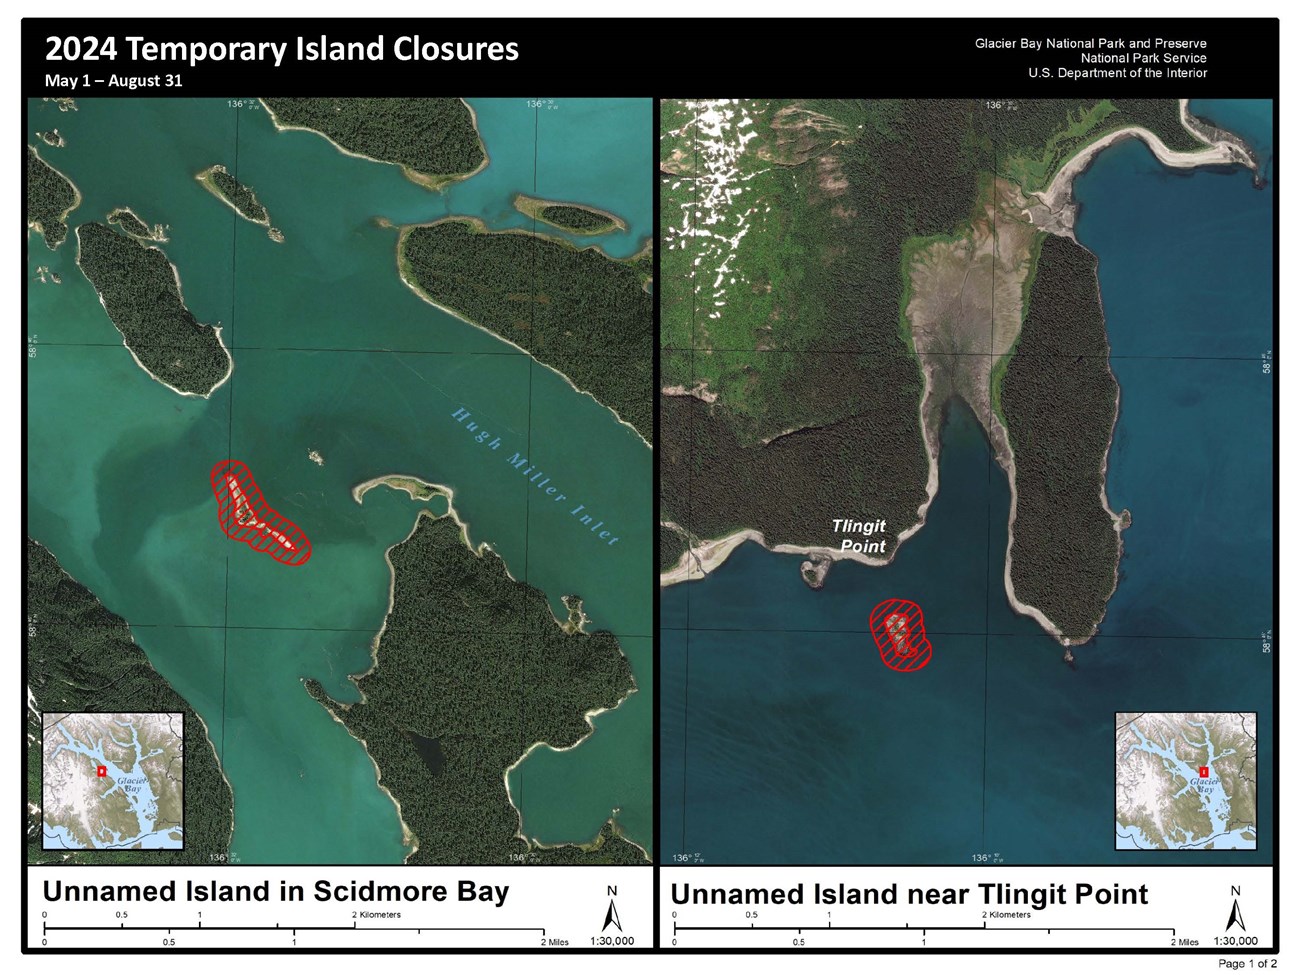 Map showing 2024 temporary island closures at two unnamed islands in Scidmore Bay and near Tlingit Point. Contact the park for details- 907-697-2230